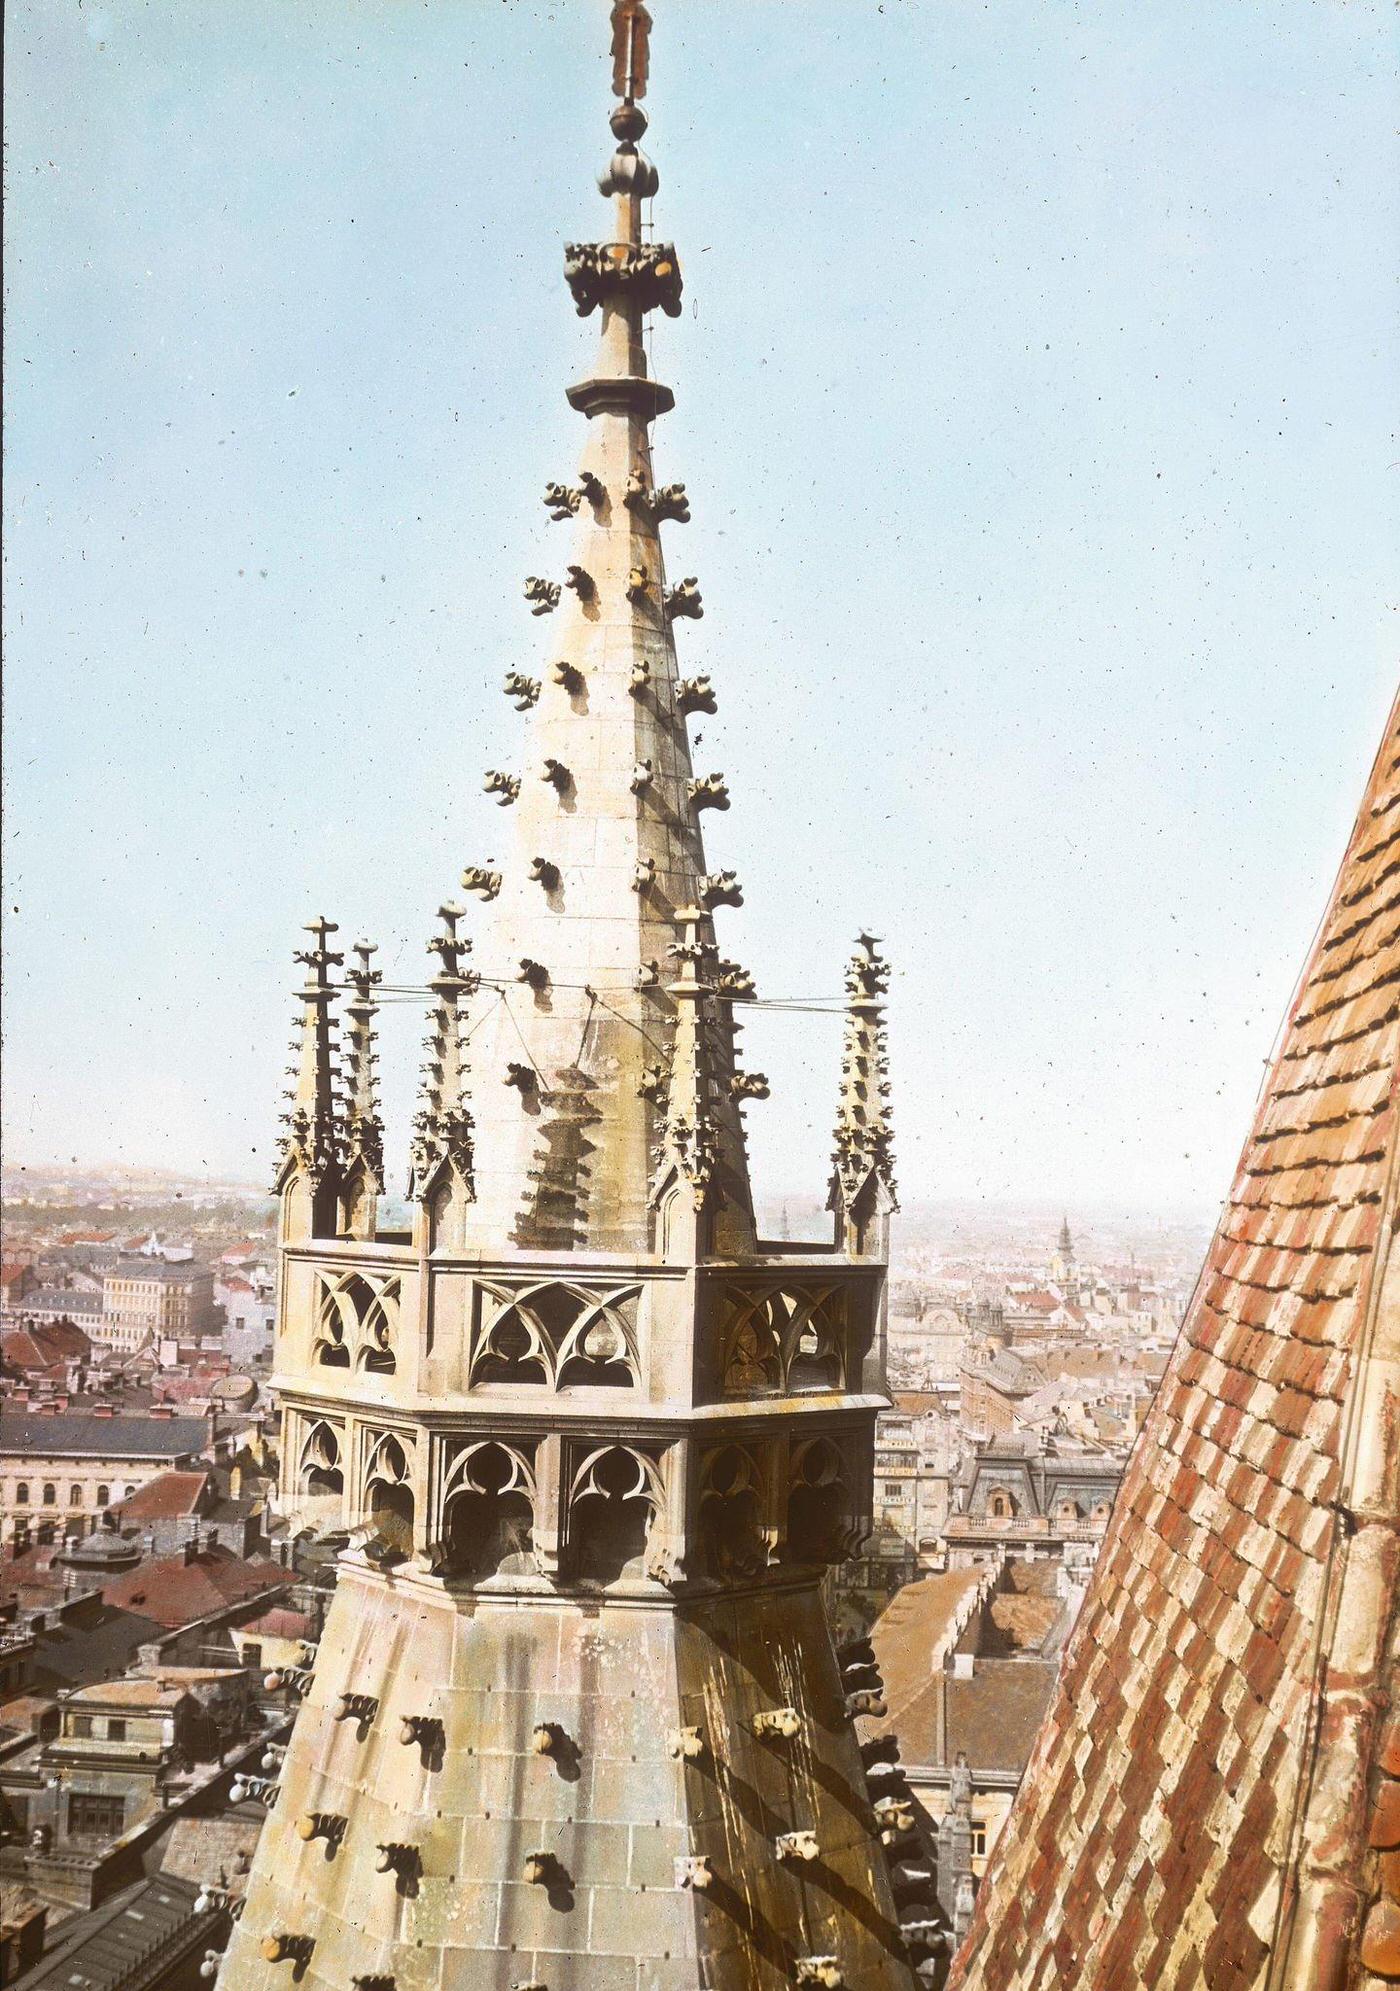 The pinnacle of the southern Heidenturm (Roman tower) of the St. Stephen's Cathedral in Vienna's first district, 1900.